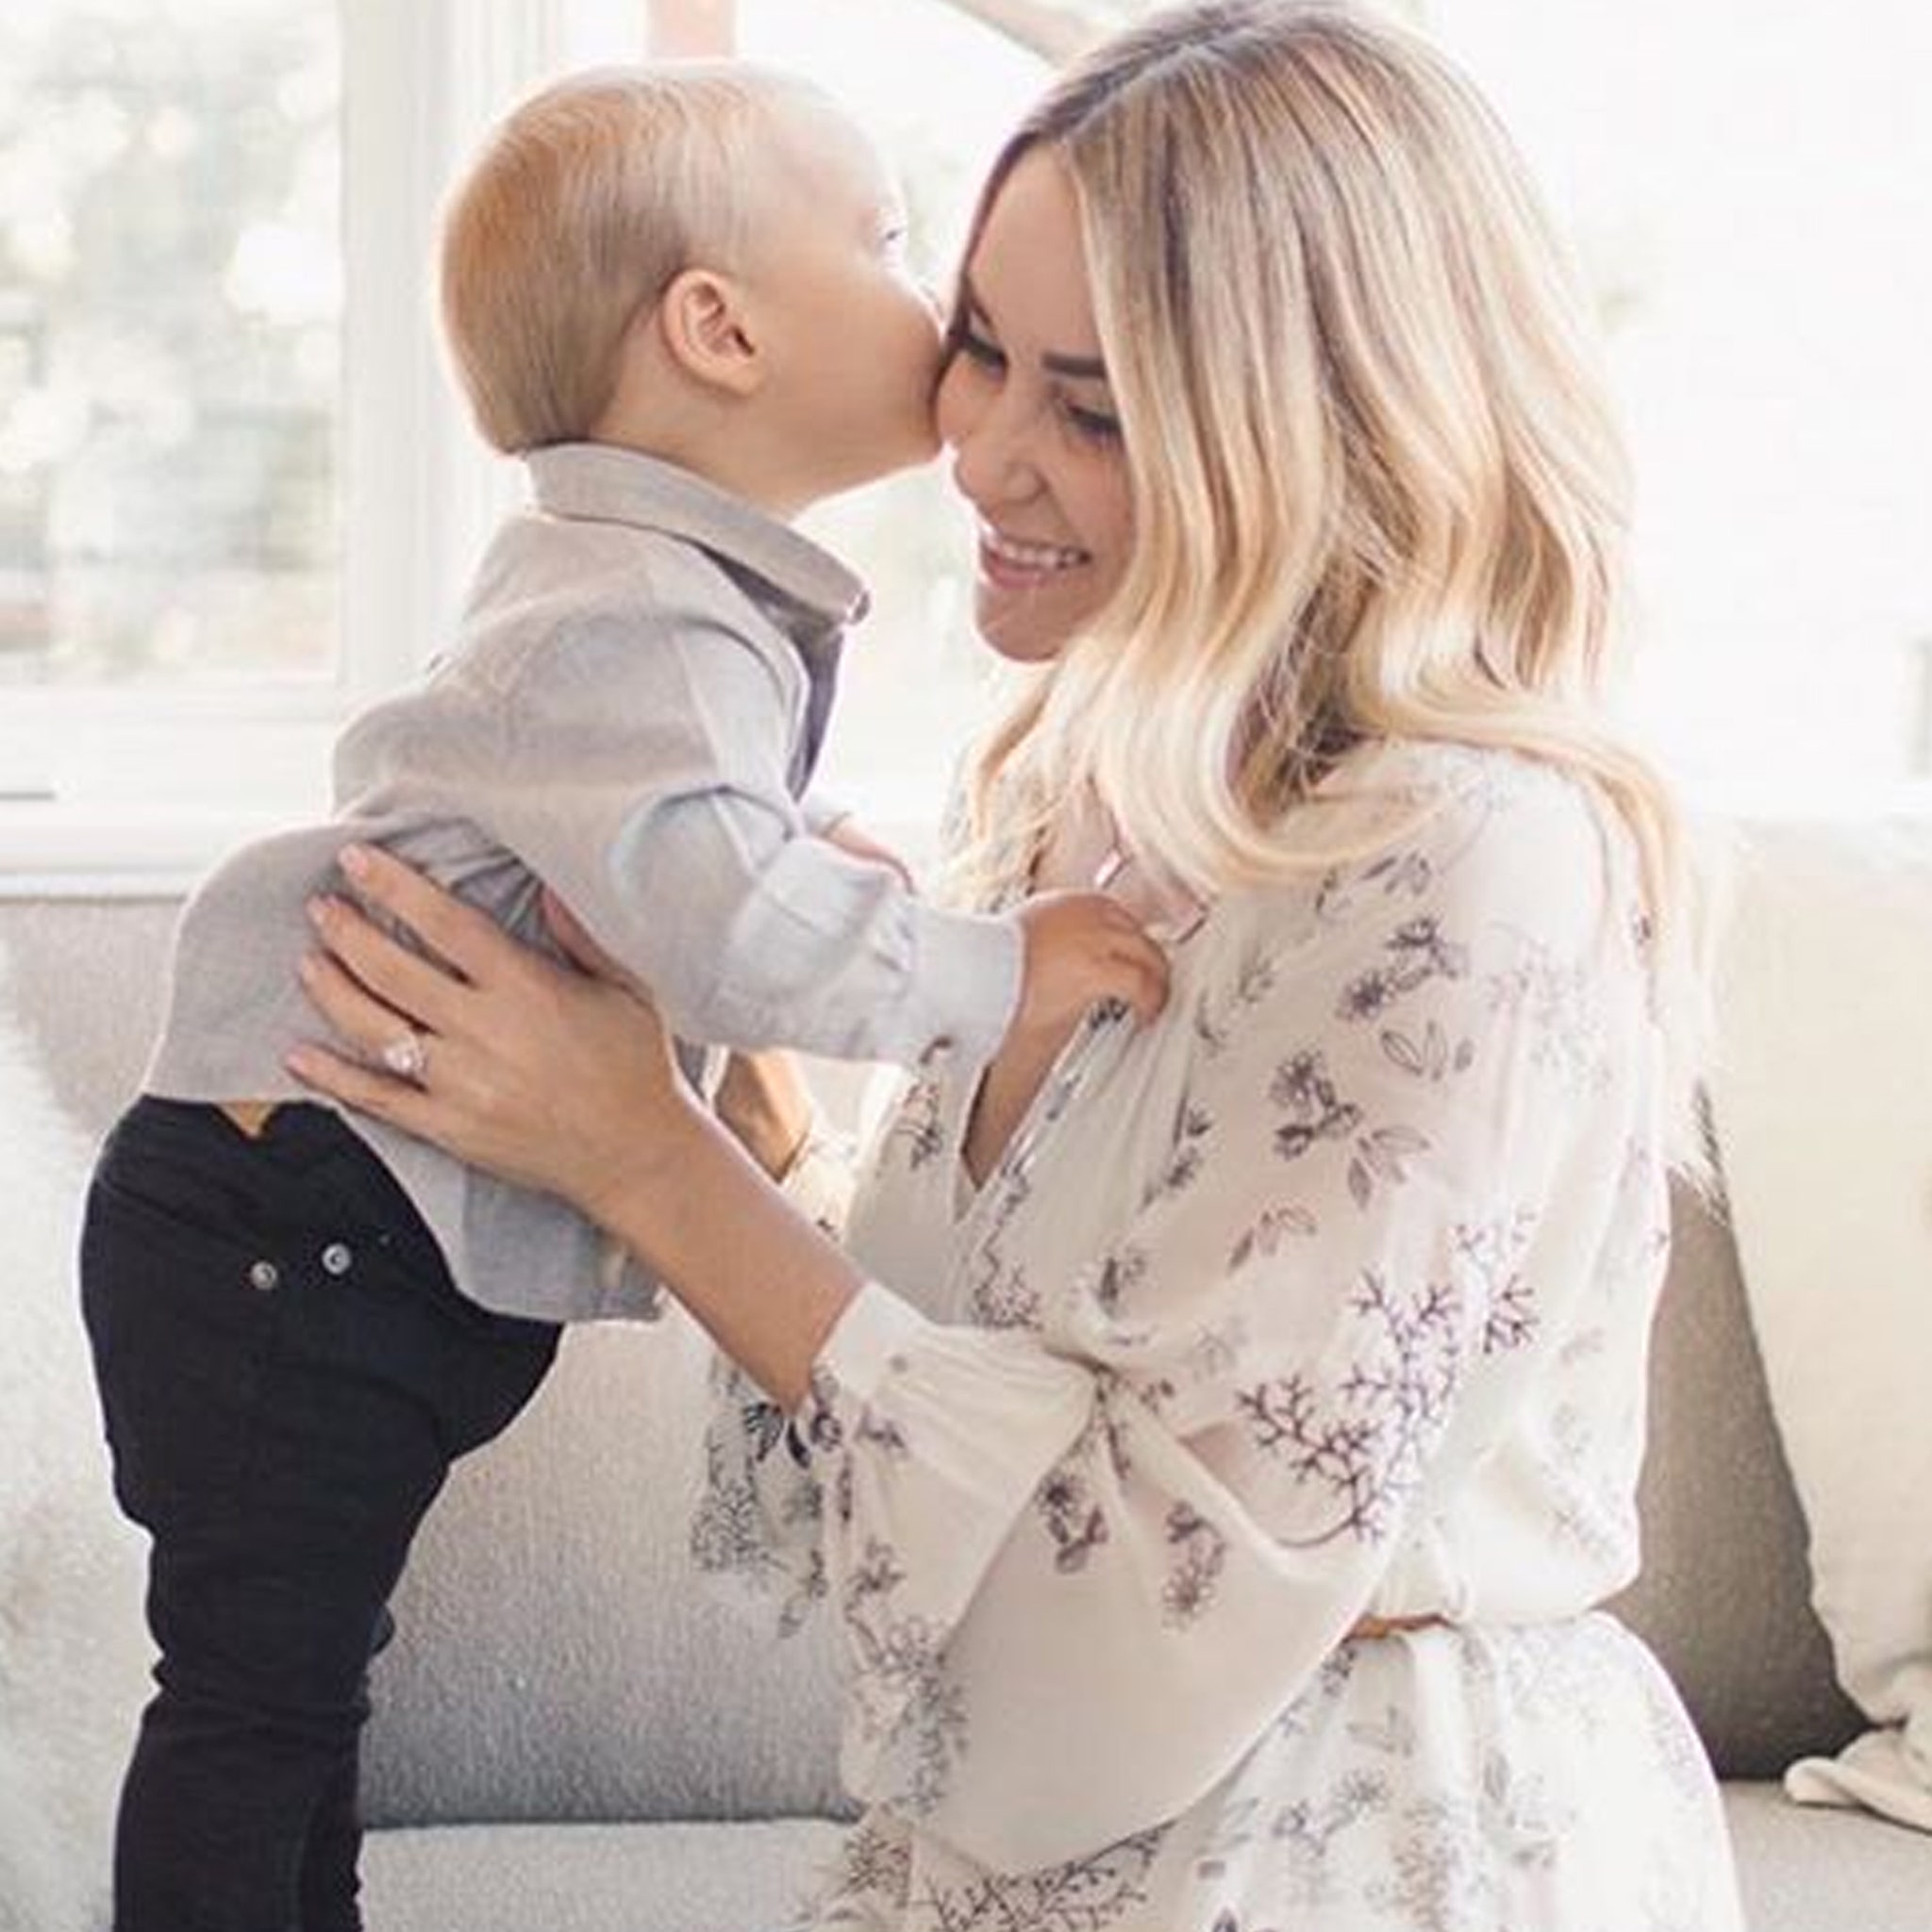 Lauren Conrad Gives Birth, Welcomes Baby No. 2 With William Tell